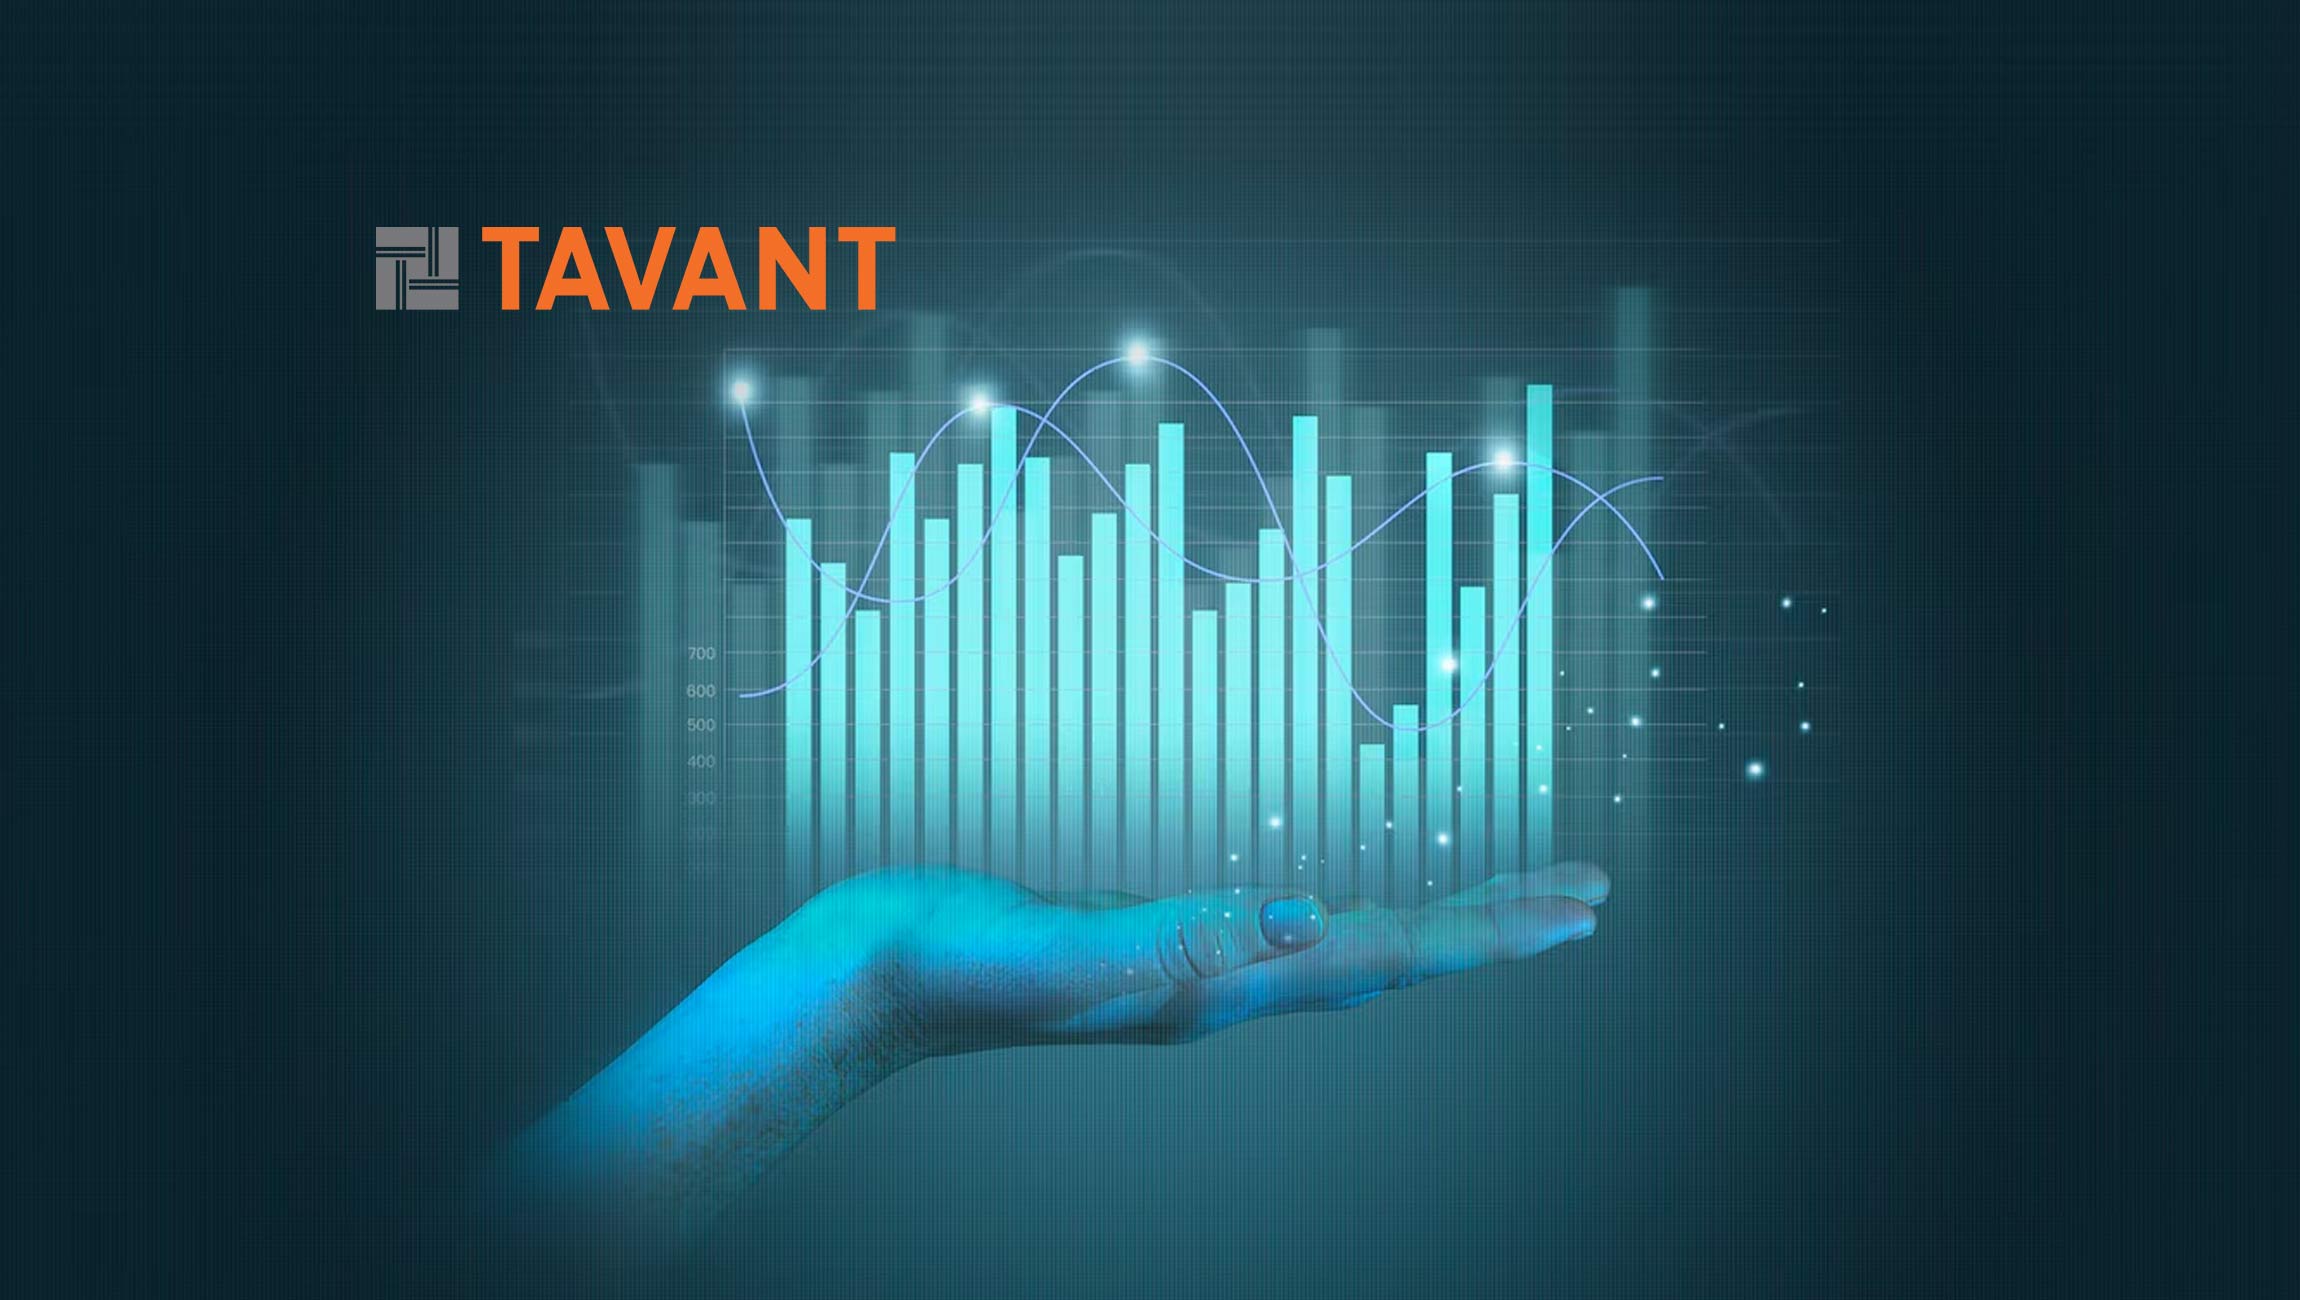 Tavant Launches New Pricing Analytics Module for its AI-powered Enterprise Analytics Platform (TMAP)